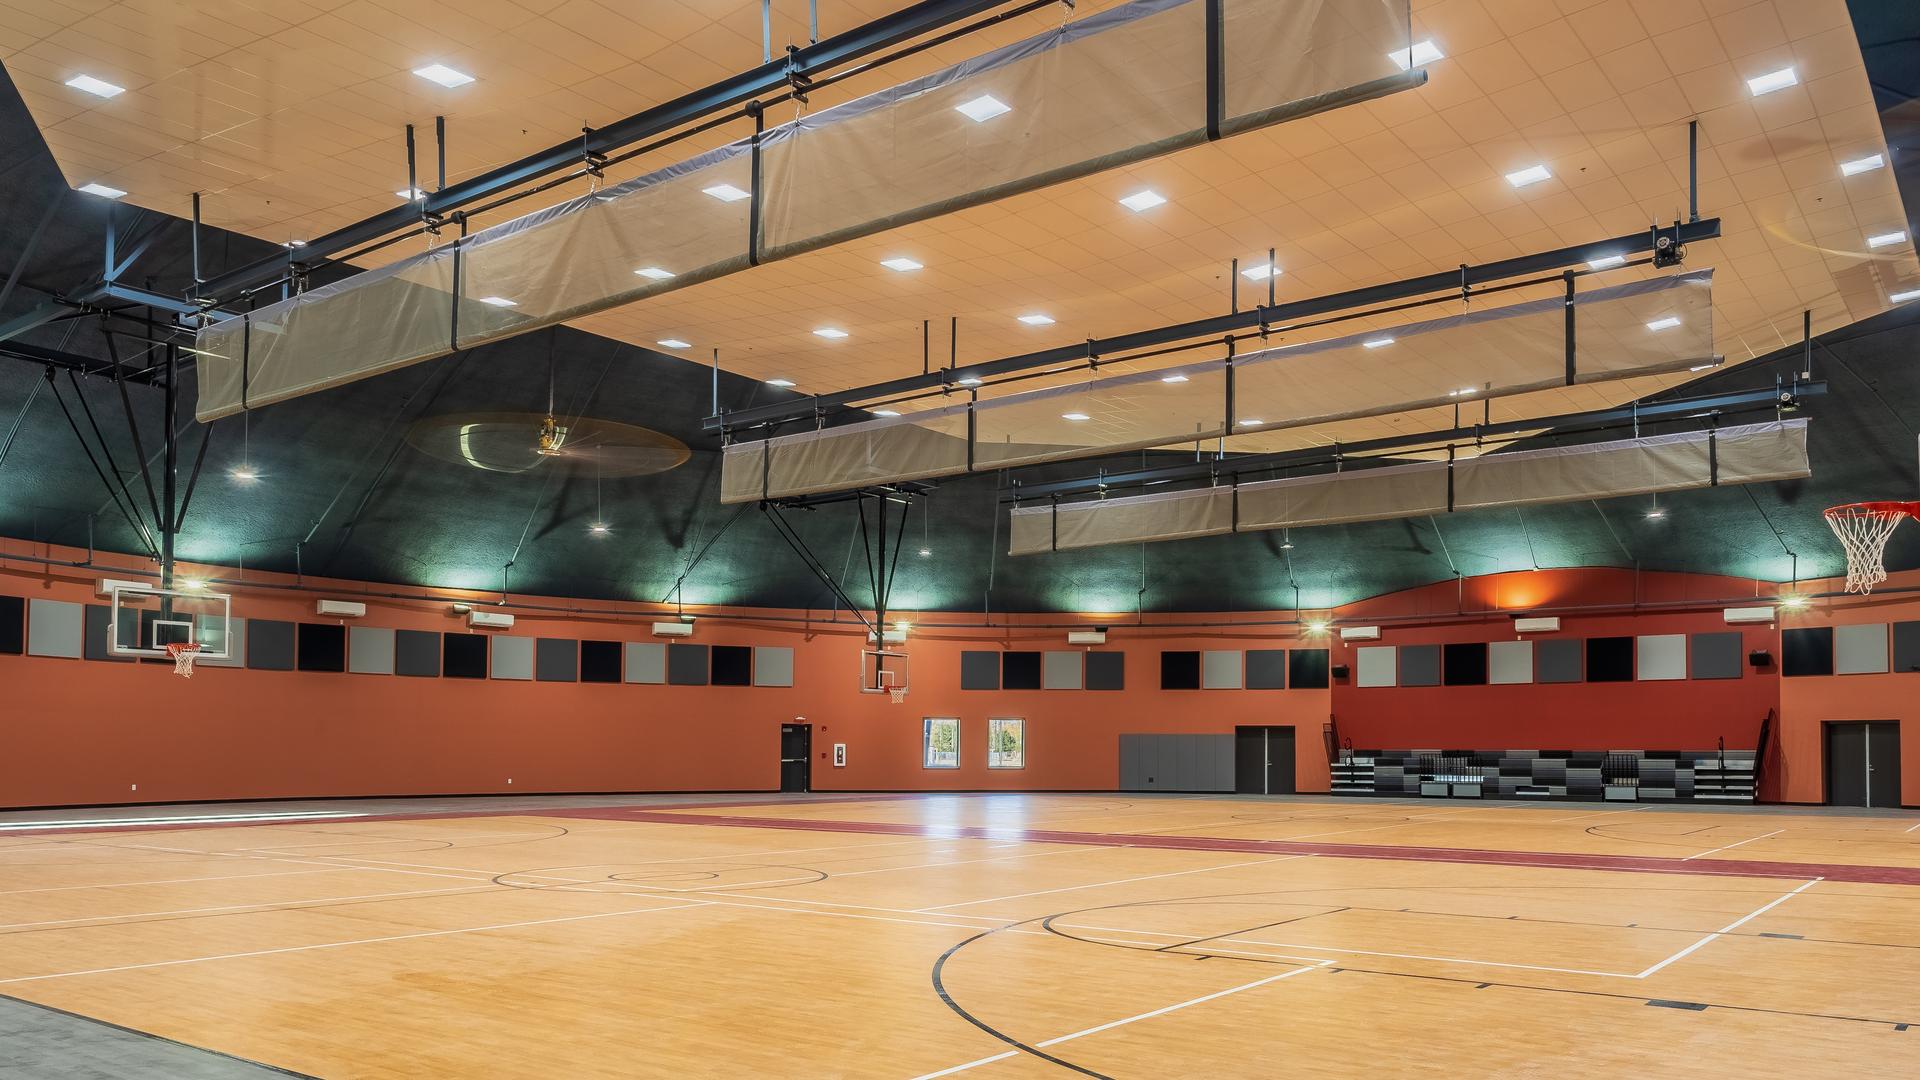 Full-size basketball courts in the gym dome.